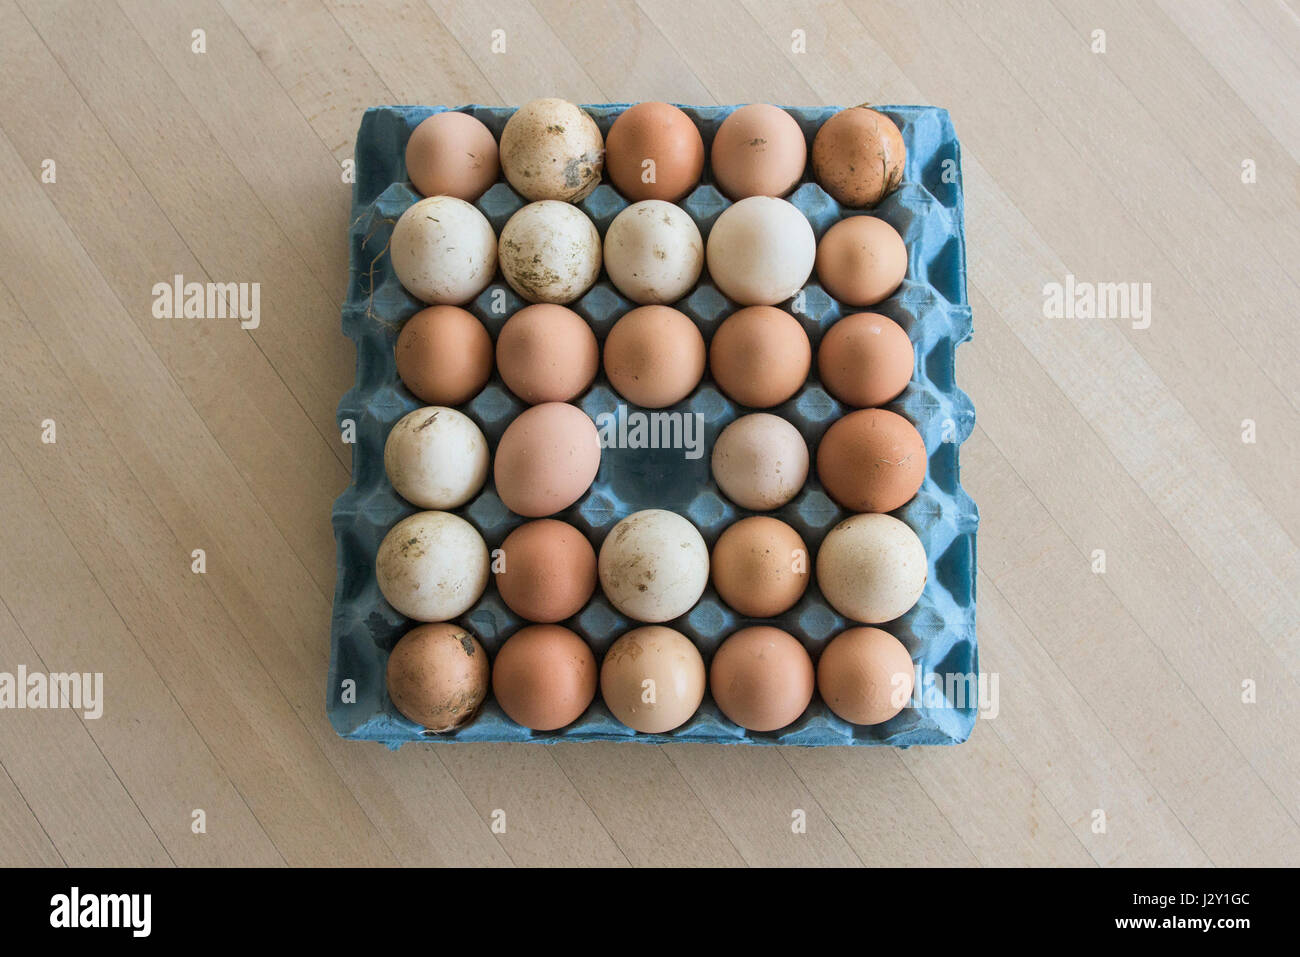 A tray of very fresh unwashed eggs Shells Natural Nature Source of Protein Free range eggs Organic Eggshell Eggshells One used One removed Stock Photo